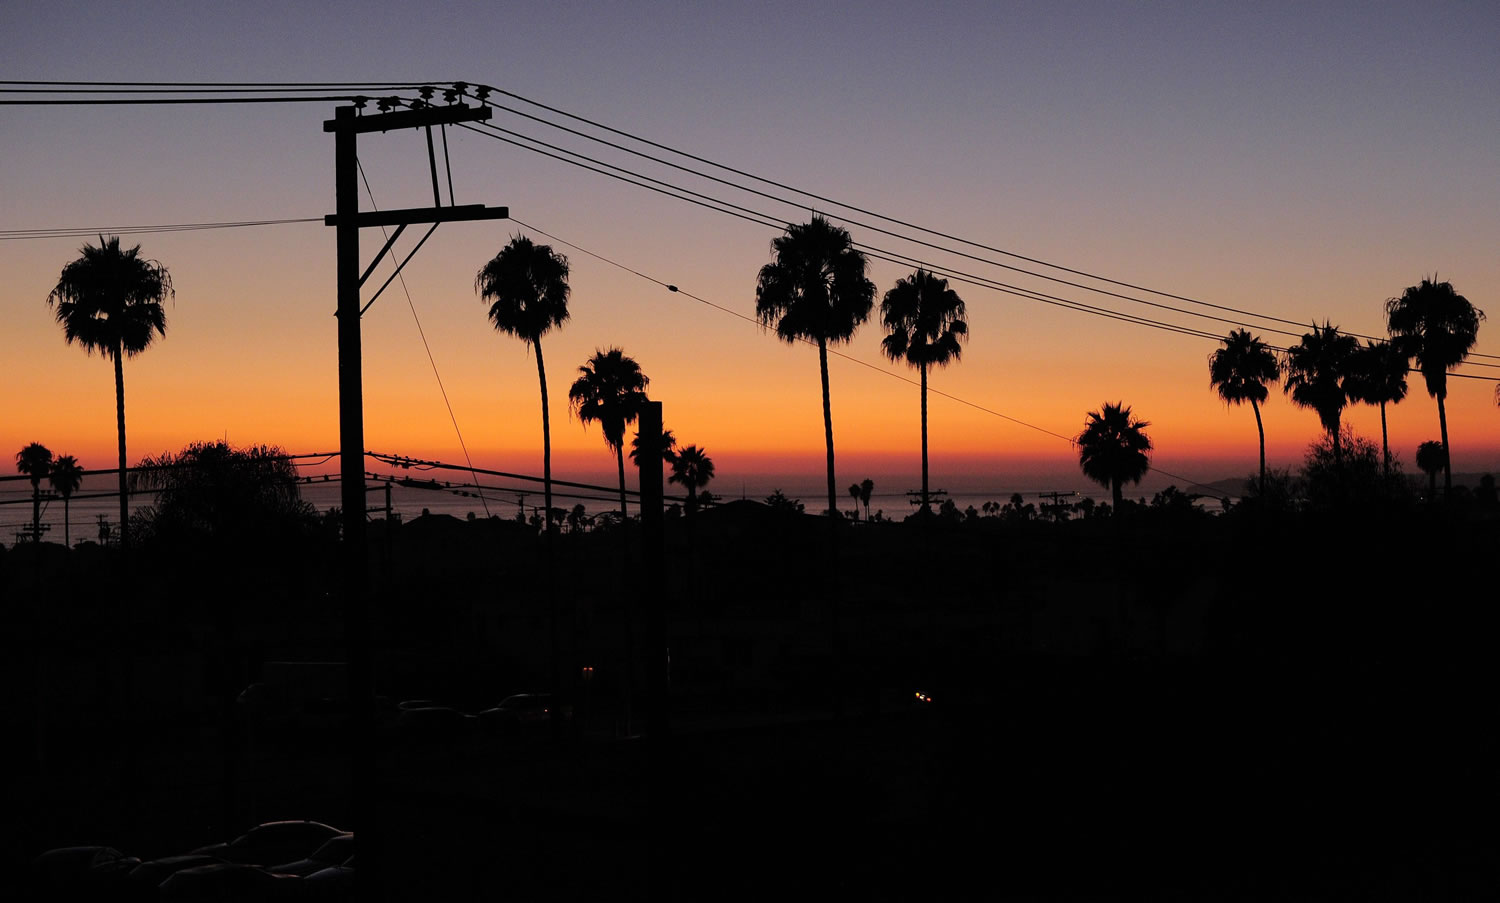 The sun sets Thursday in San Clemente, Calif. as homes sit below in the darkness during a power outage. There were no catastrophes caused by the widespread outage that knocked out power in a region with a population of nearly 6 million spanning both sides of the U.S.-Mexico border.